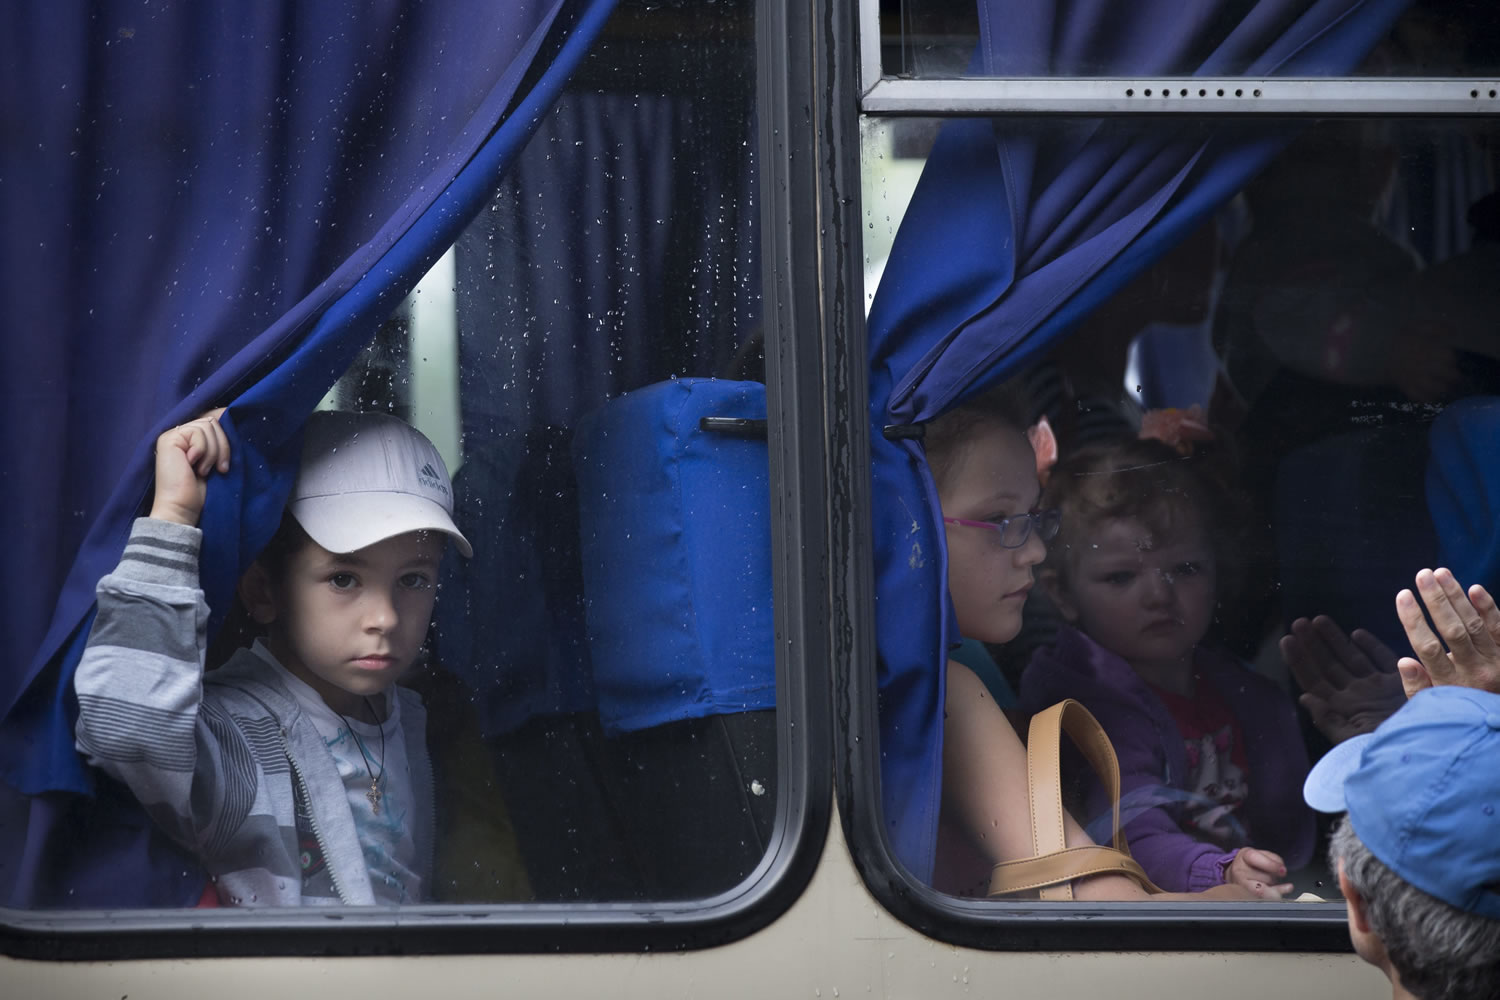 Children look through the bus window while leaving the city fearing the shelling attacks during fighting between Ukrainian government forces and pro-Russian militants in Slovyansk, Ukraine, Thursday, May 29, 2014.  In Slovyansk, a city 90 kilometers (55 miles) north of Donetsk there have been repeated clashes over the past few weeks, with residential areas being shelled by mortars Wednesday from government forces.